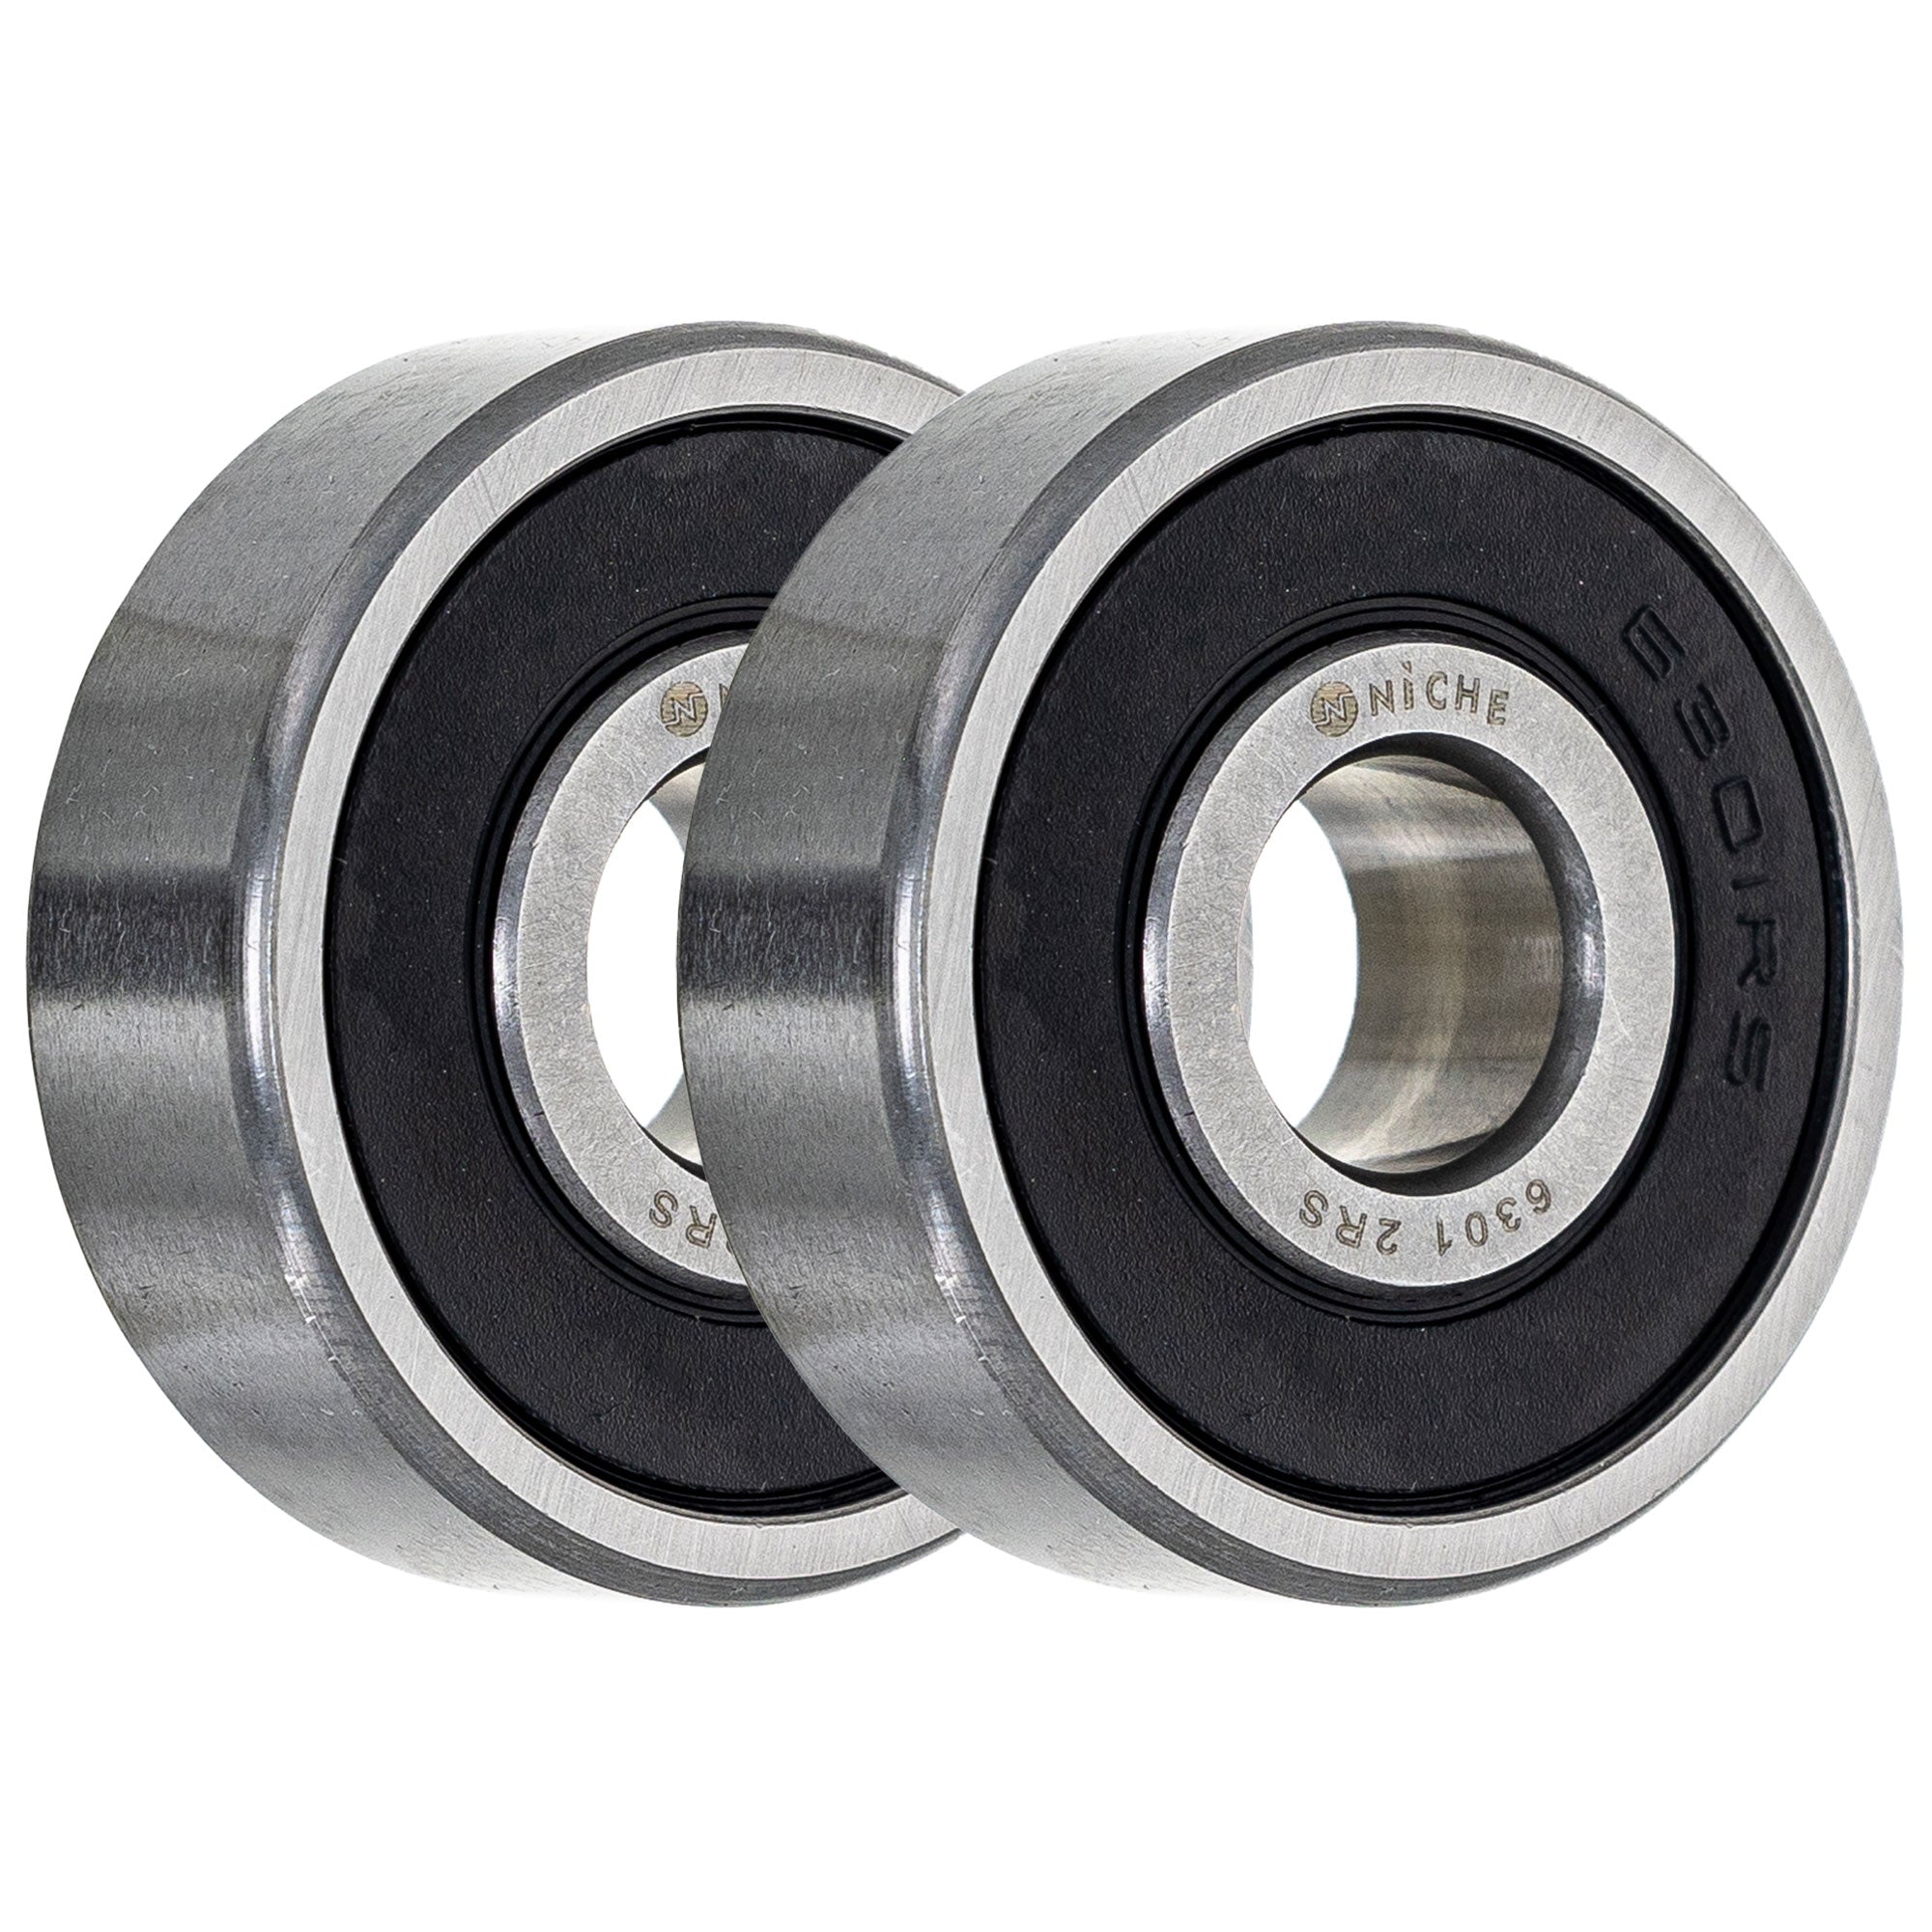 Single Row, Deep Groove, Ball Bearing Pack of 2 2-Pack for zOTHER YZ80 YZ60 YSR50 XR80R NICHE 519-CBB2243R